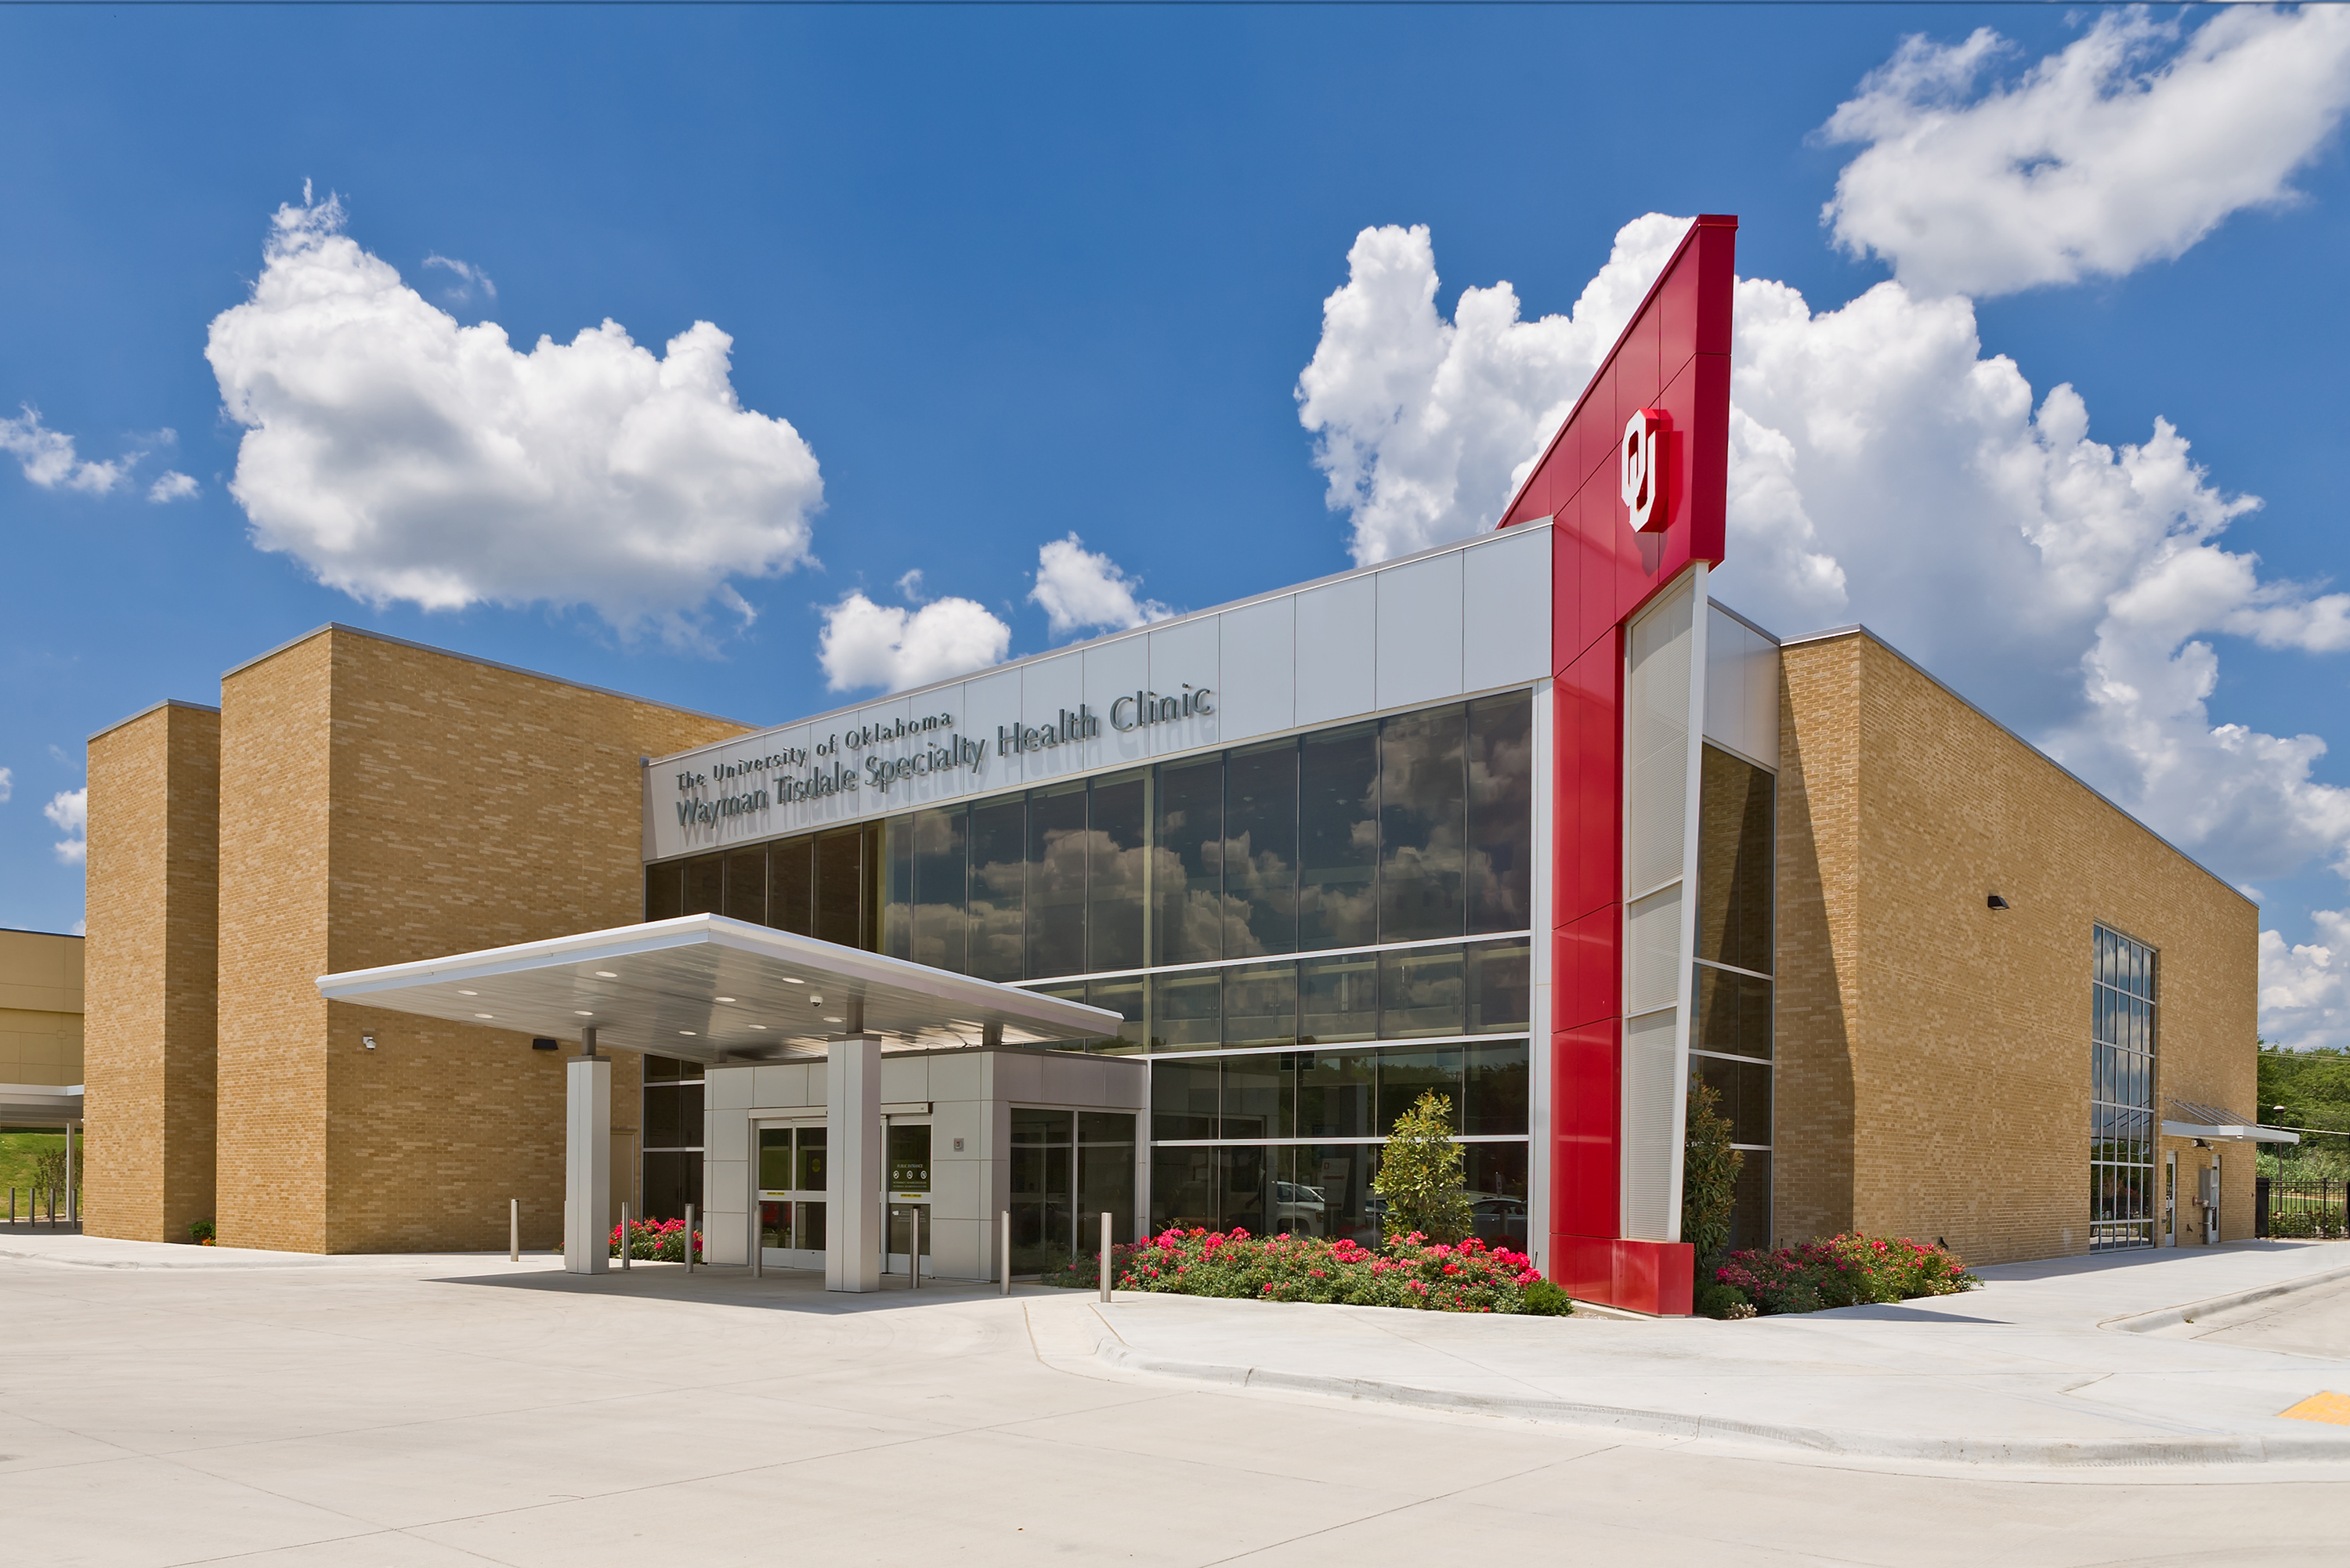 Wayman Tisdale Specialty Health Clinic - Wallace Engineering